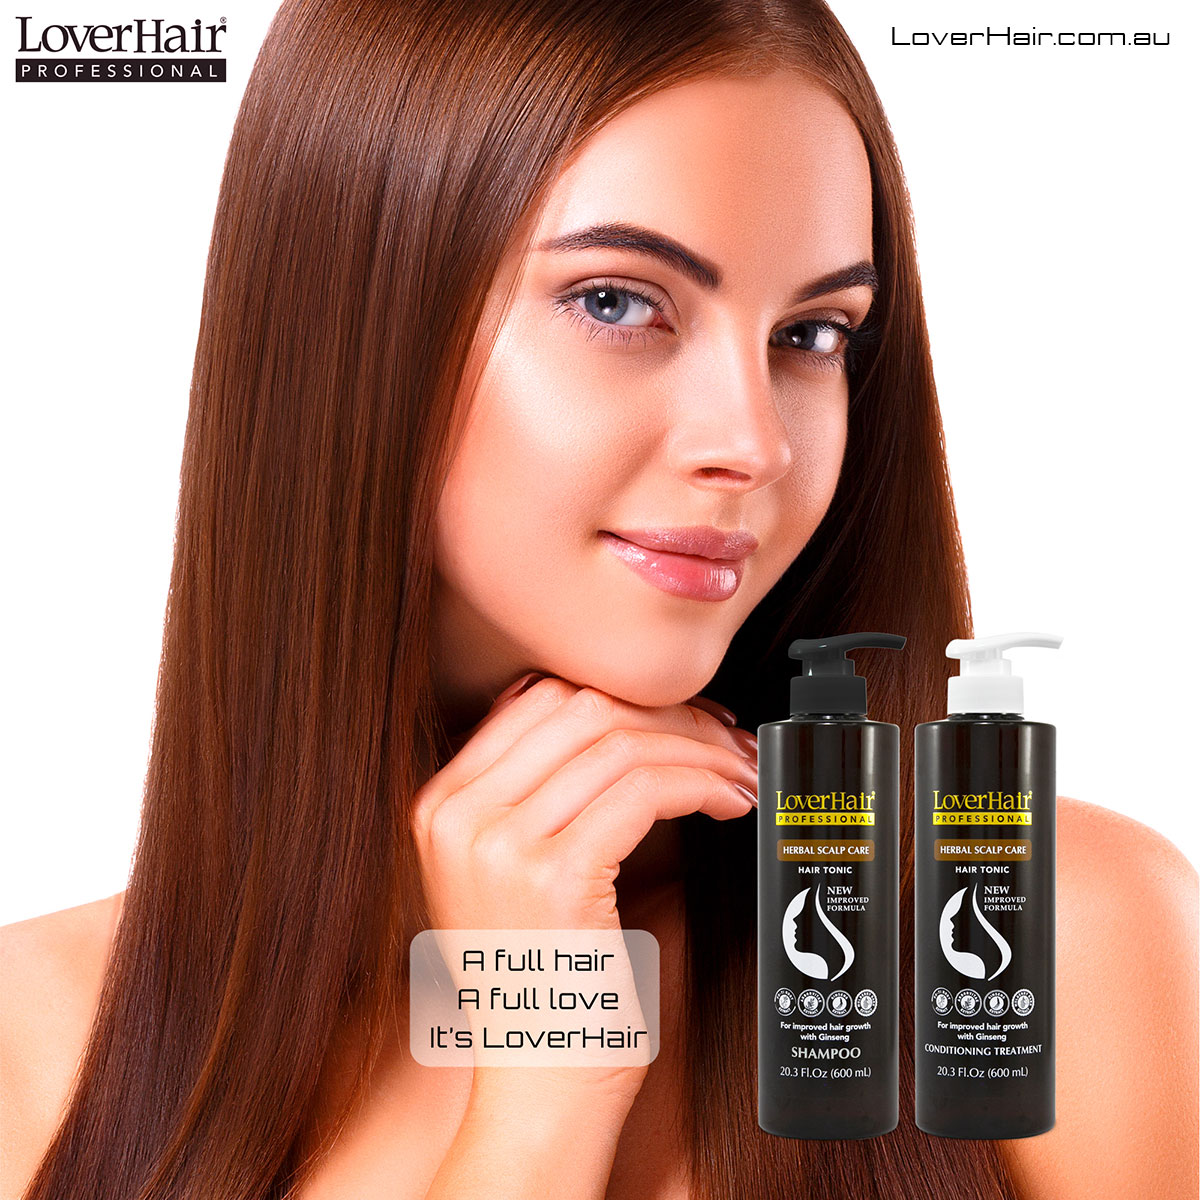 LoverHair Professional HERBAL SCALP CARE Conditioner & Shampoo are made with natural ingredients and are specifically designed to help reduce hair loss and promote hair growth. It has never been easier to revitalize your scalp & nourish your hai.  #HerbalScalpCare #AntiHairLoss